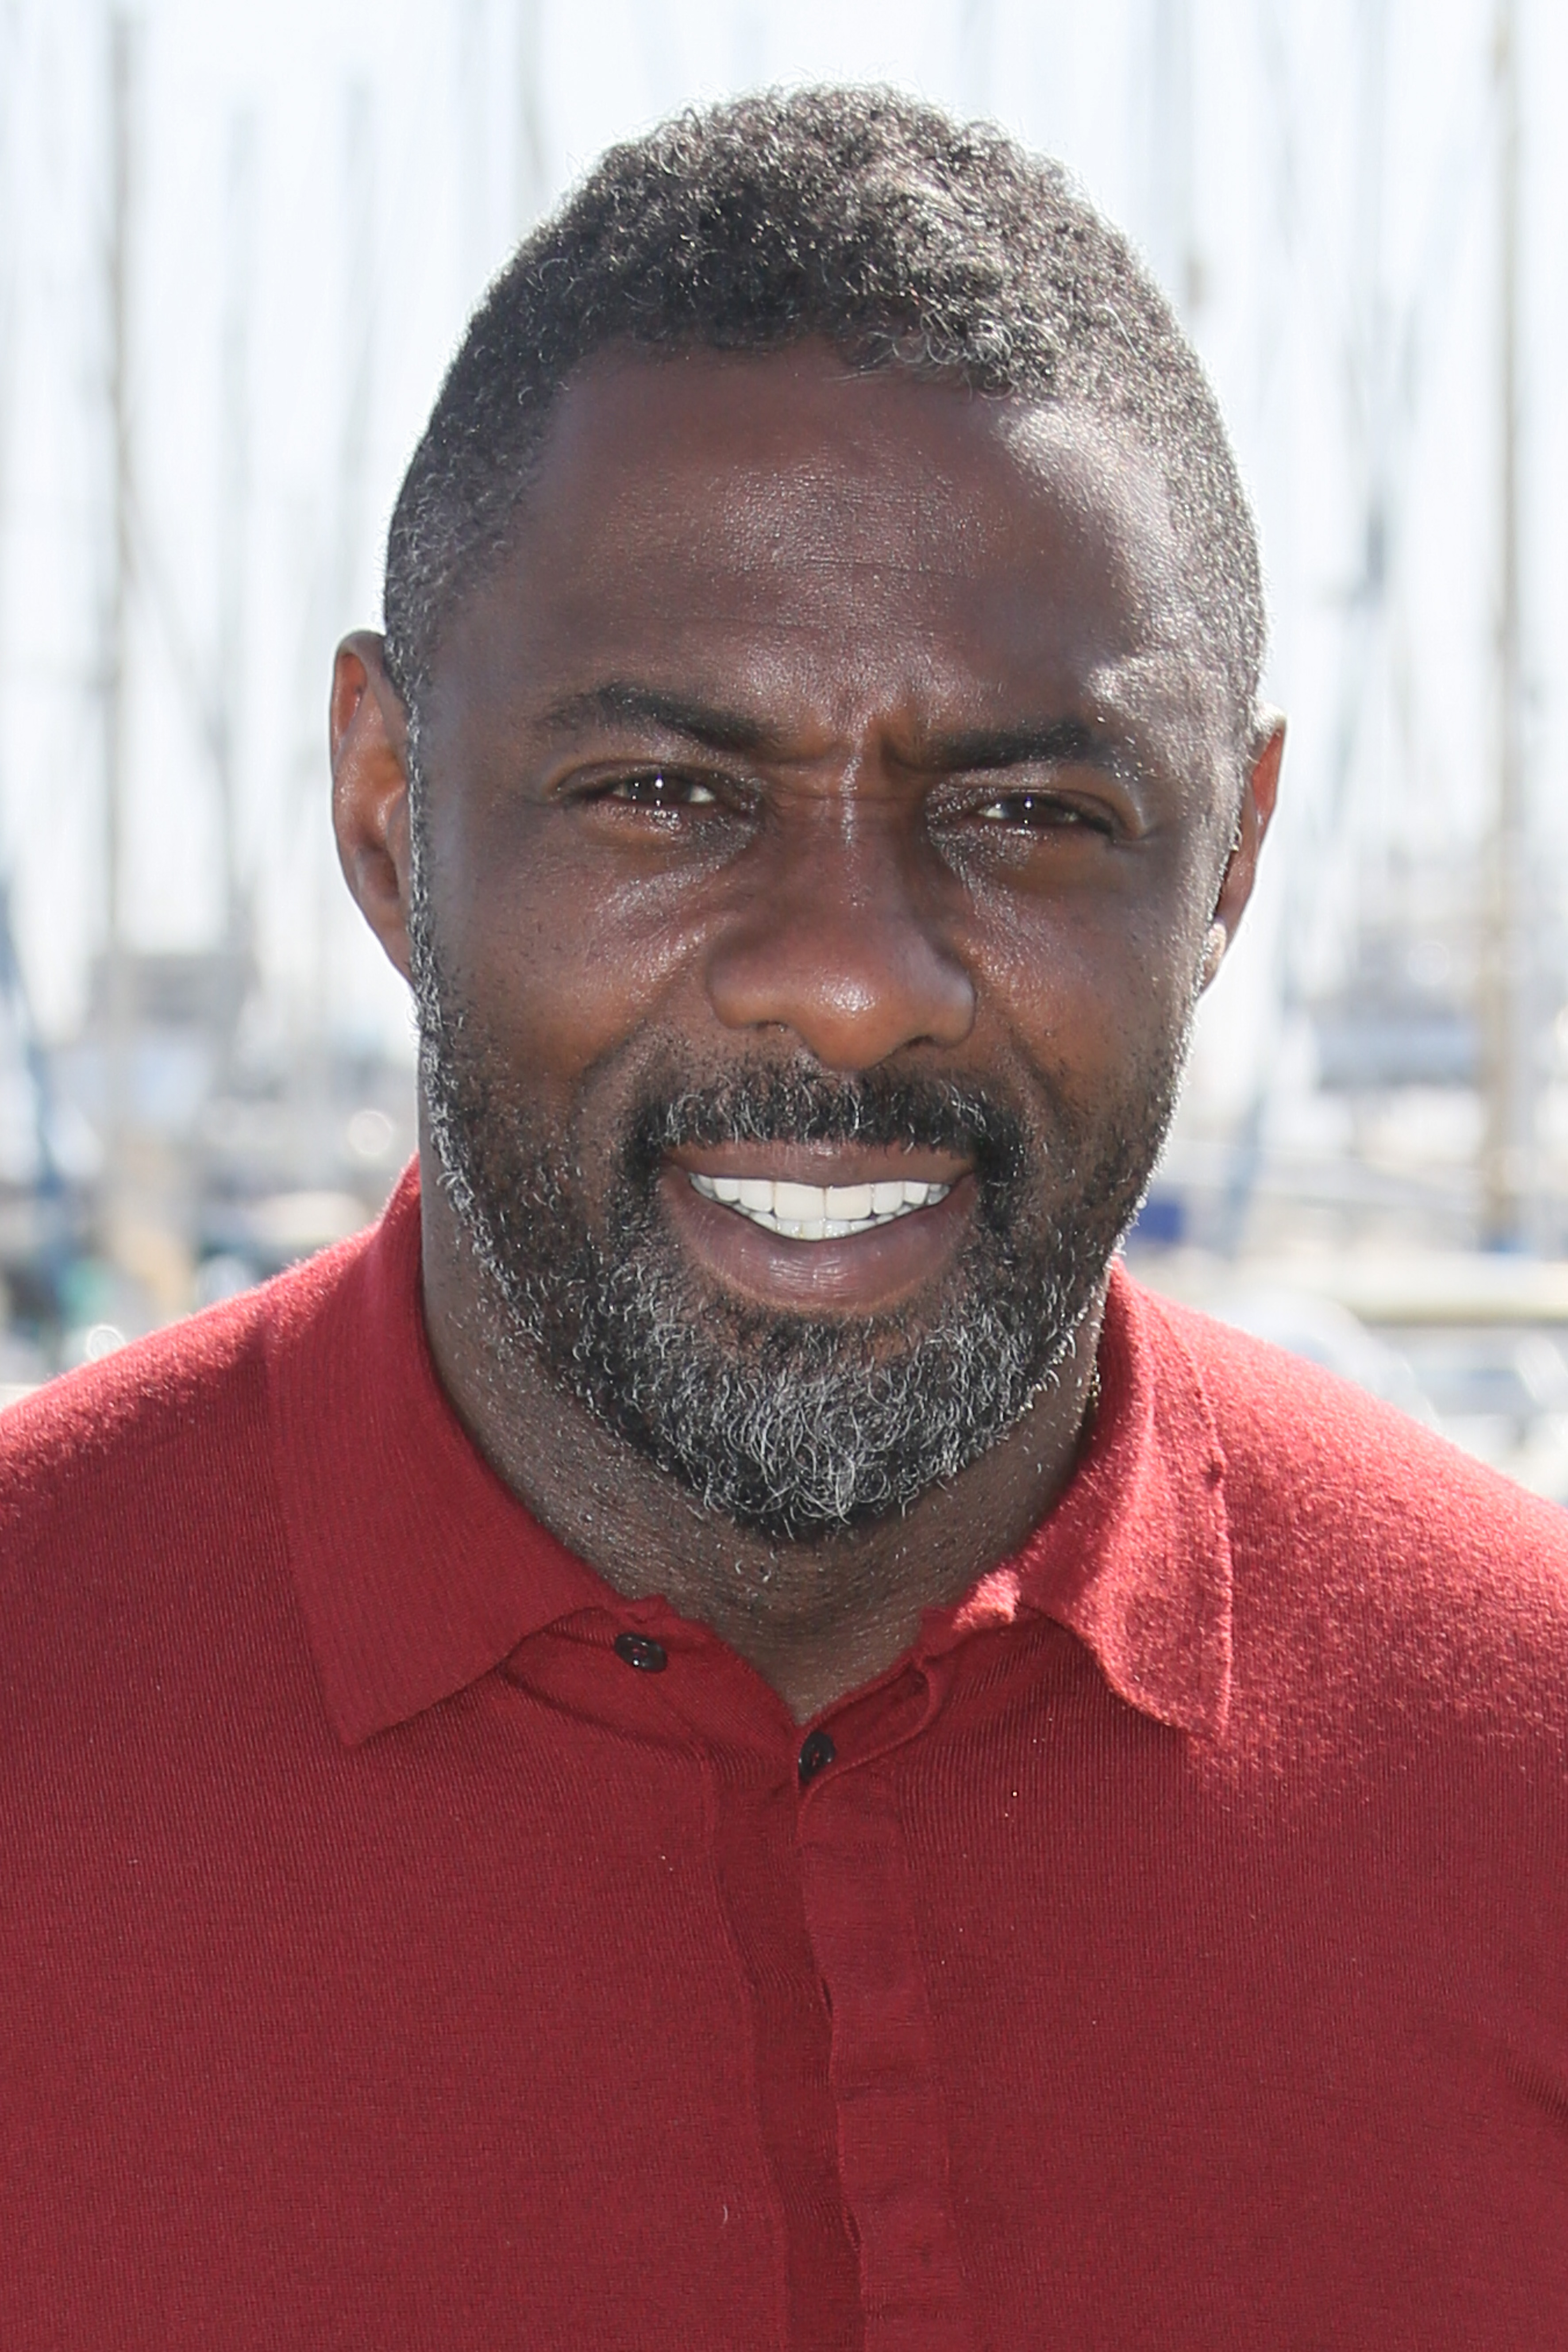 Idris Elba at "Mandela, My Dad And Me" photocall as part of MIPTV 2015 in Cannes, France on April 14, 2015. (Tony Barson—FilmMagic/Getty Images)